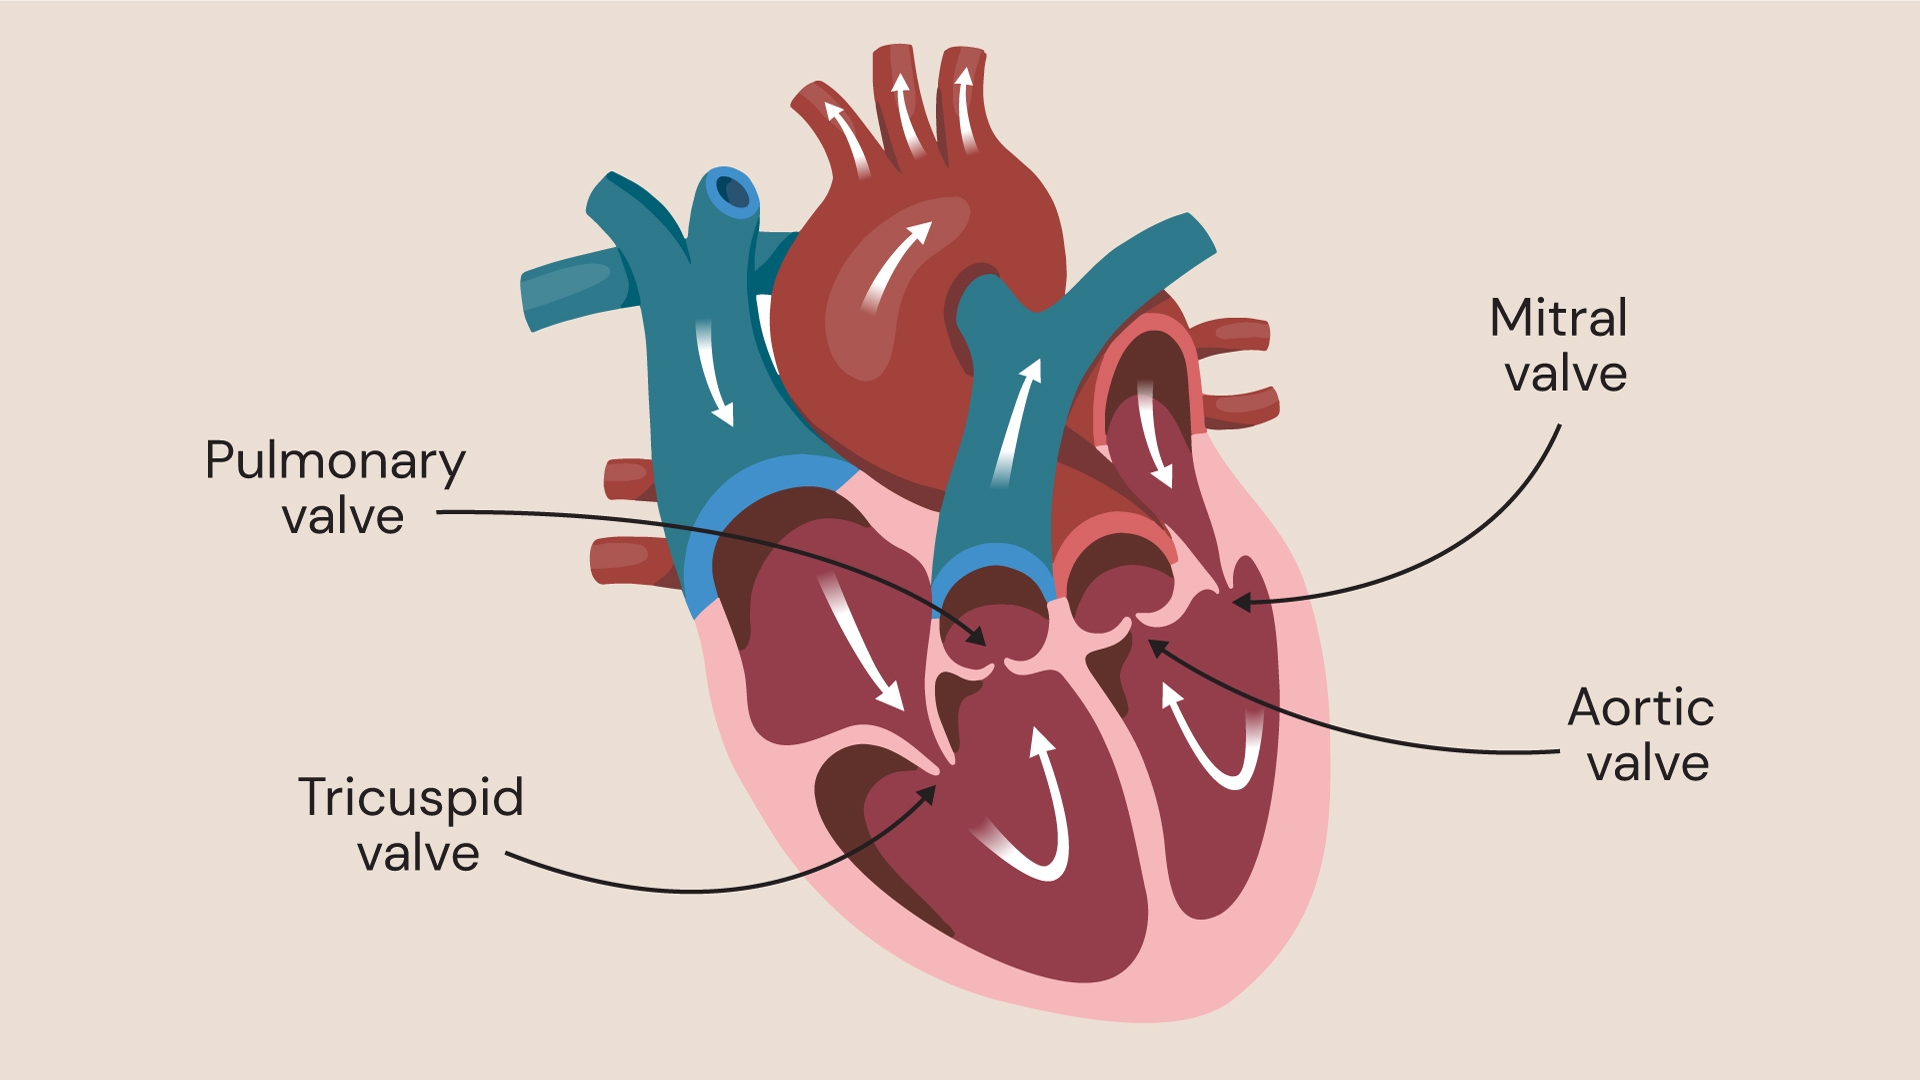 The heart has 4 valves; mitral, pulmonary, tricuspid and aortic